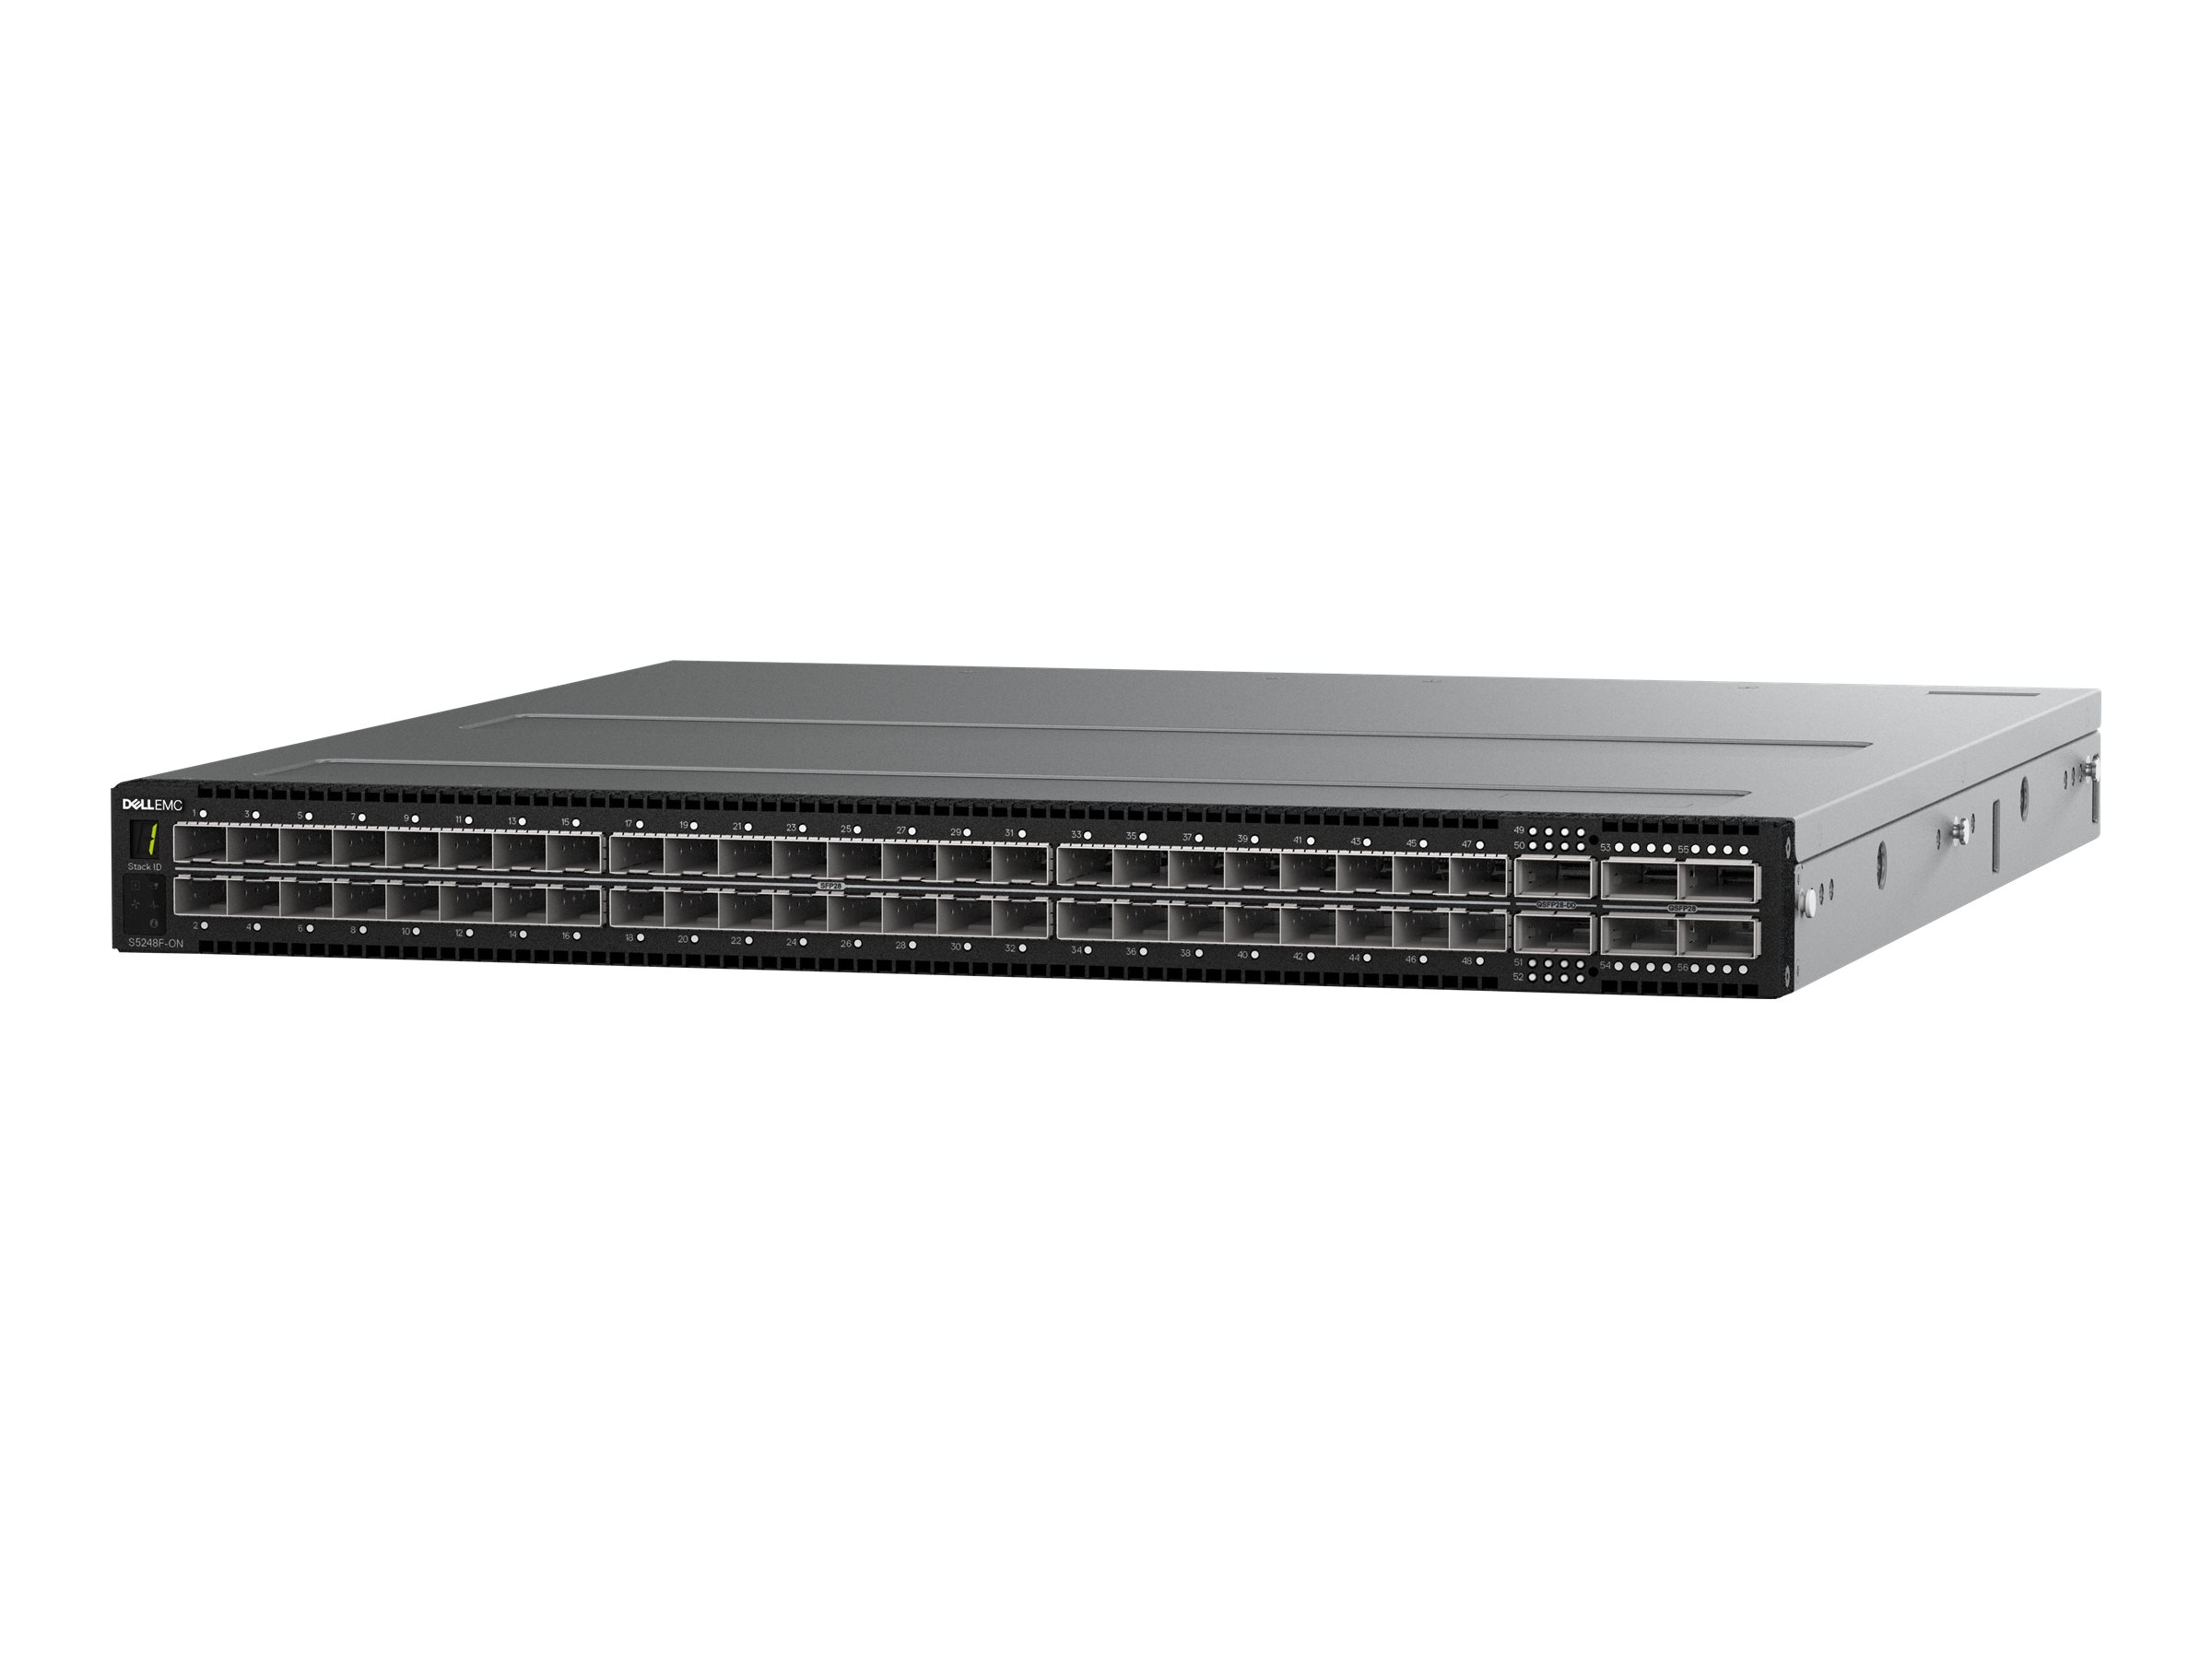 Dell Networking S5248F-ON - Switch - L3 - managed - 48 x 25 Gigabit SFP28 + 4 x 100 Gigabit QSFP28 + 2 x 200 Gigabit QSFP28-DD -